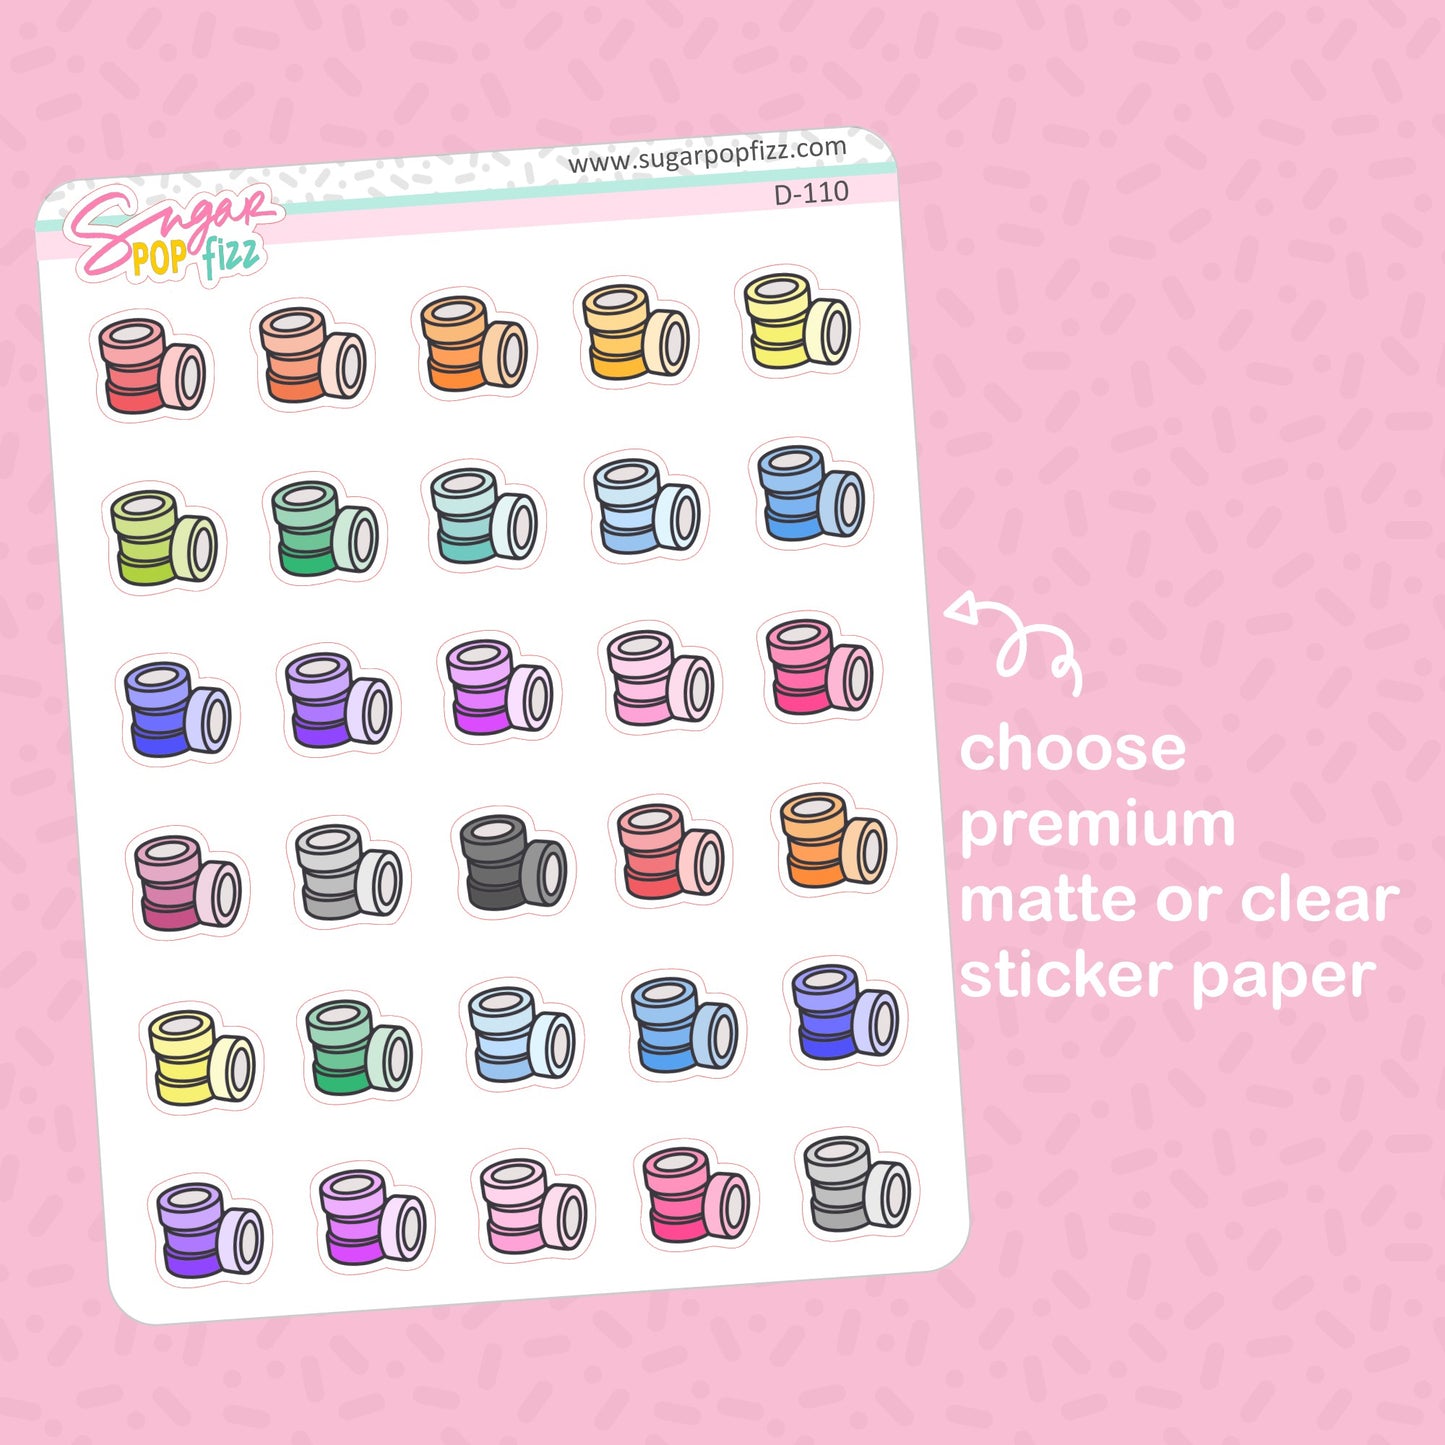 Washi Doodle Stickers - D110